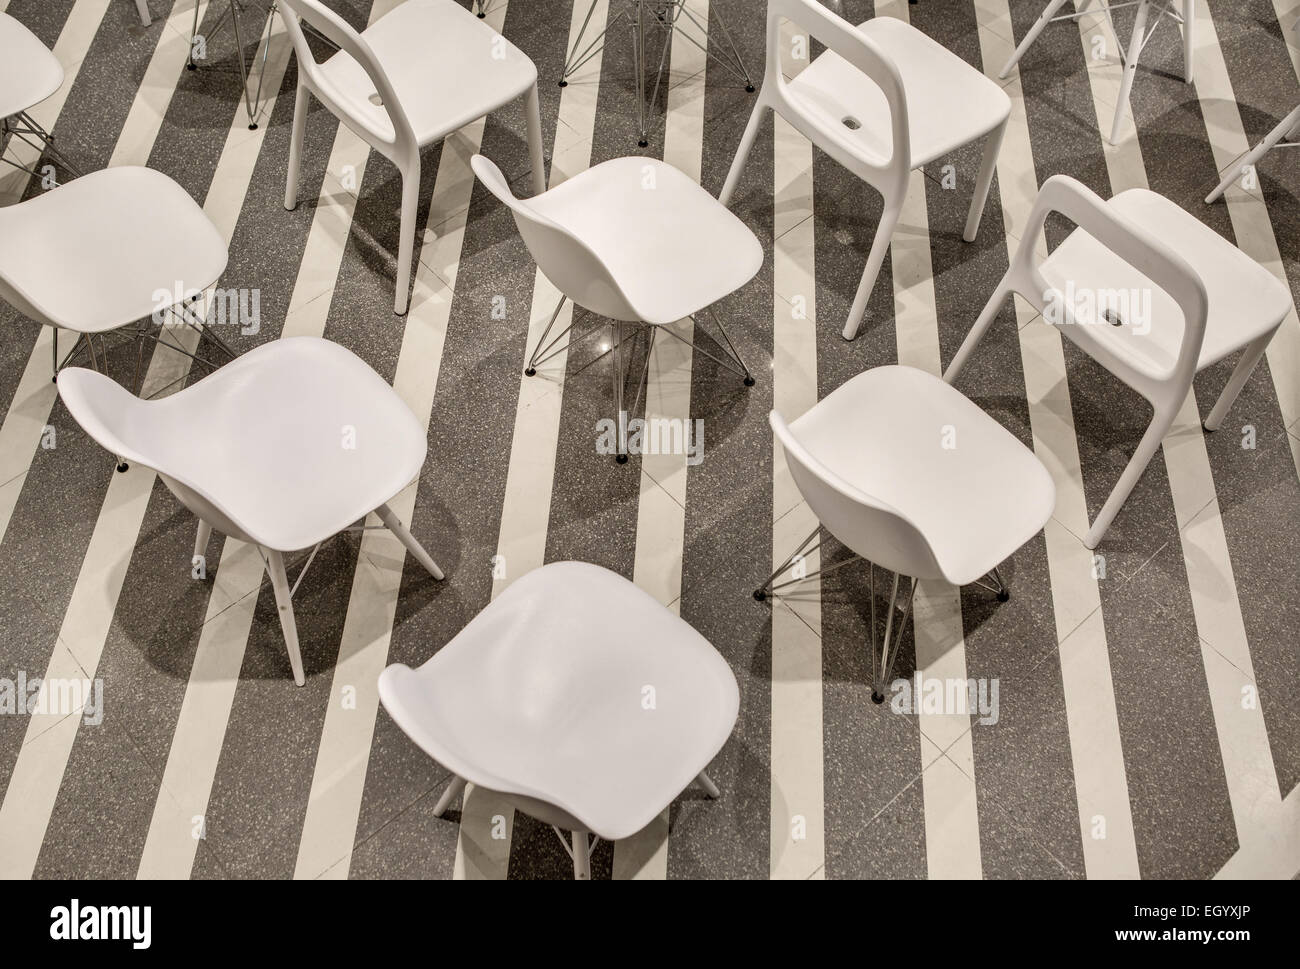 Row of white plastic chairs, top view. Stock Photo